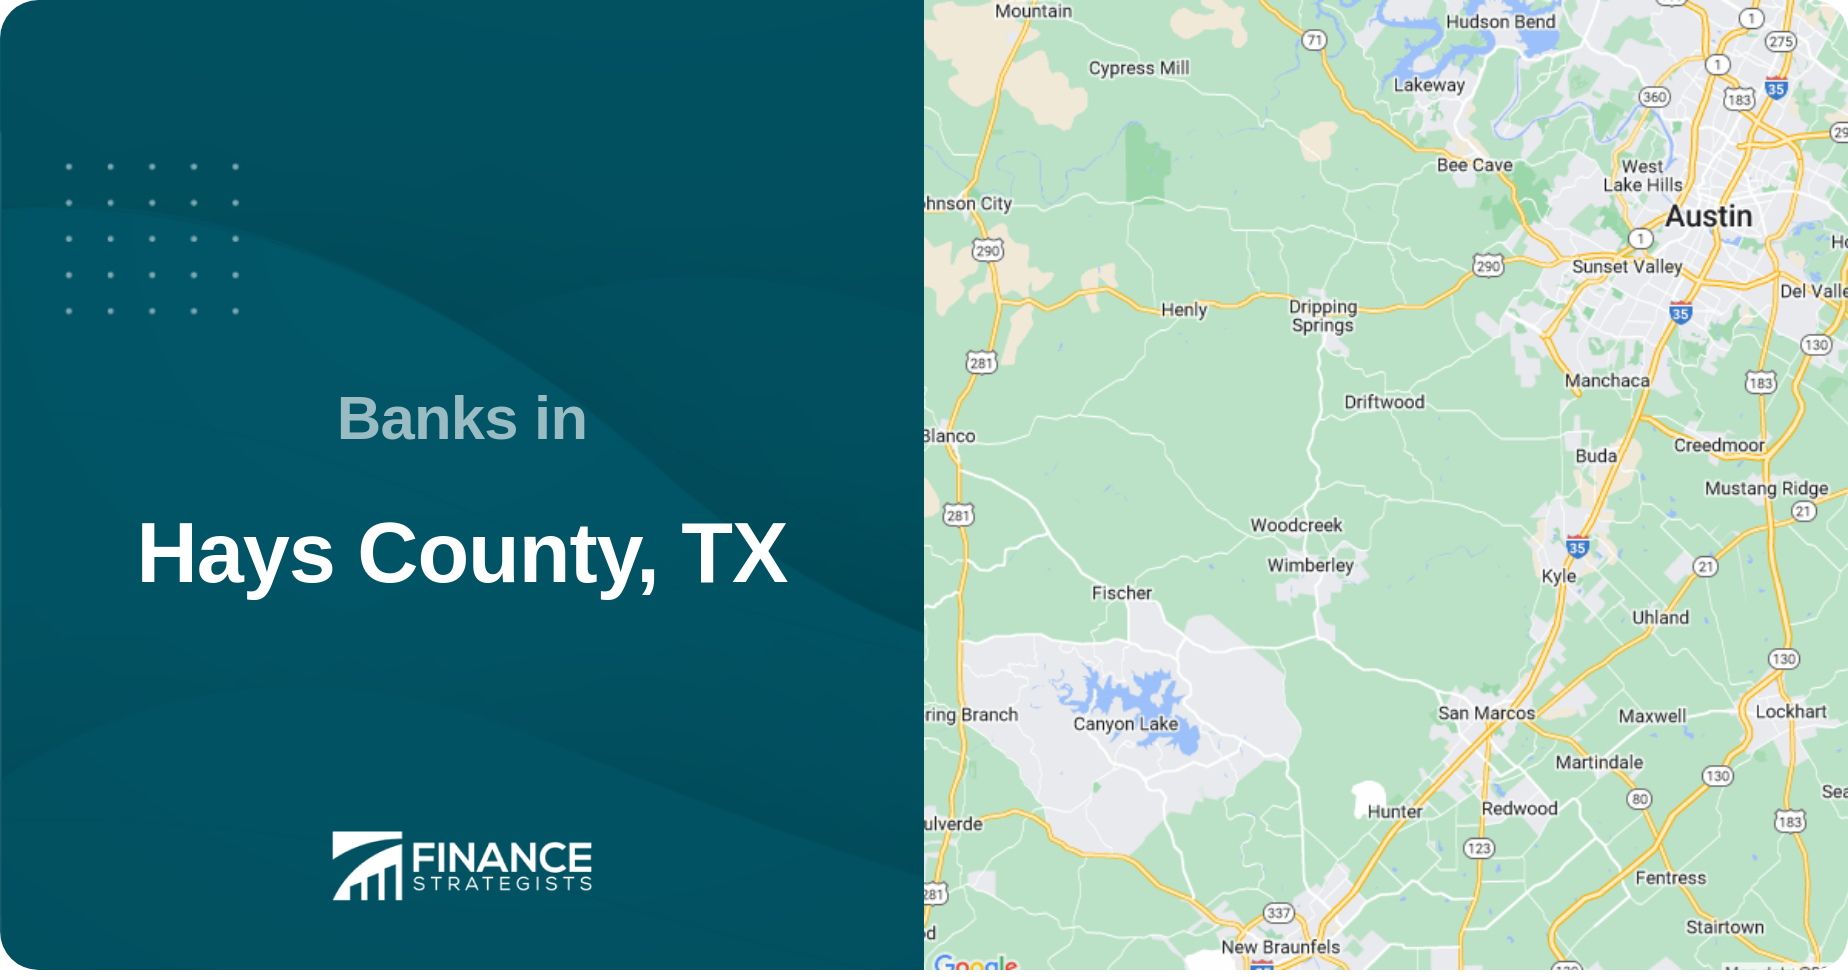 Banks in Hays County, TX